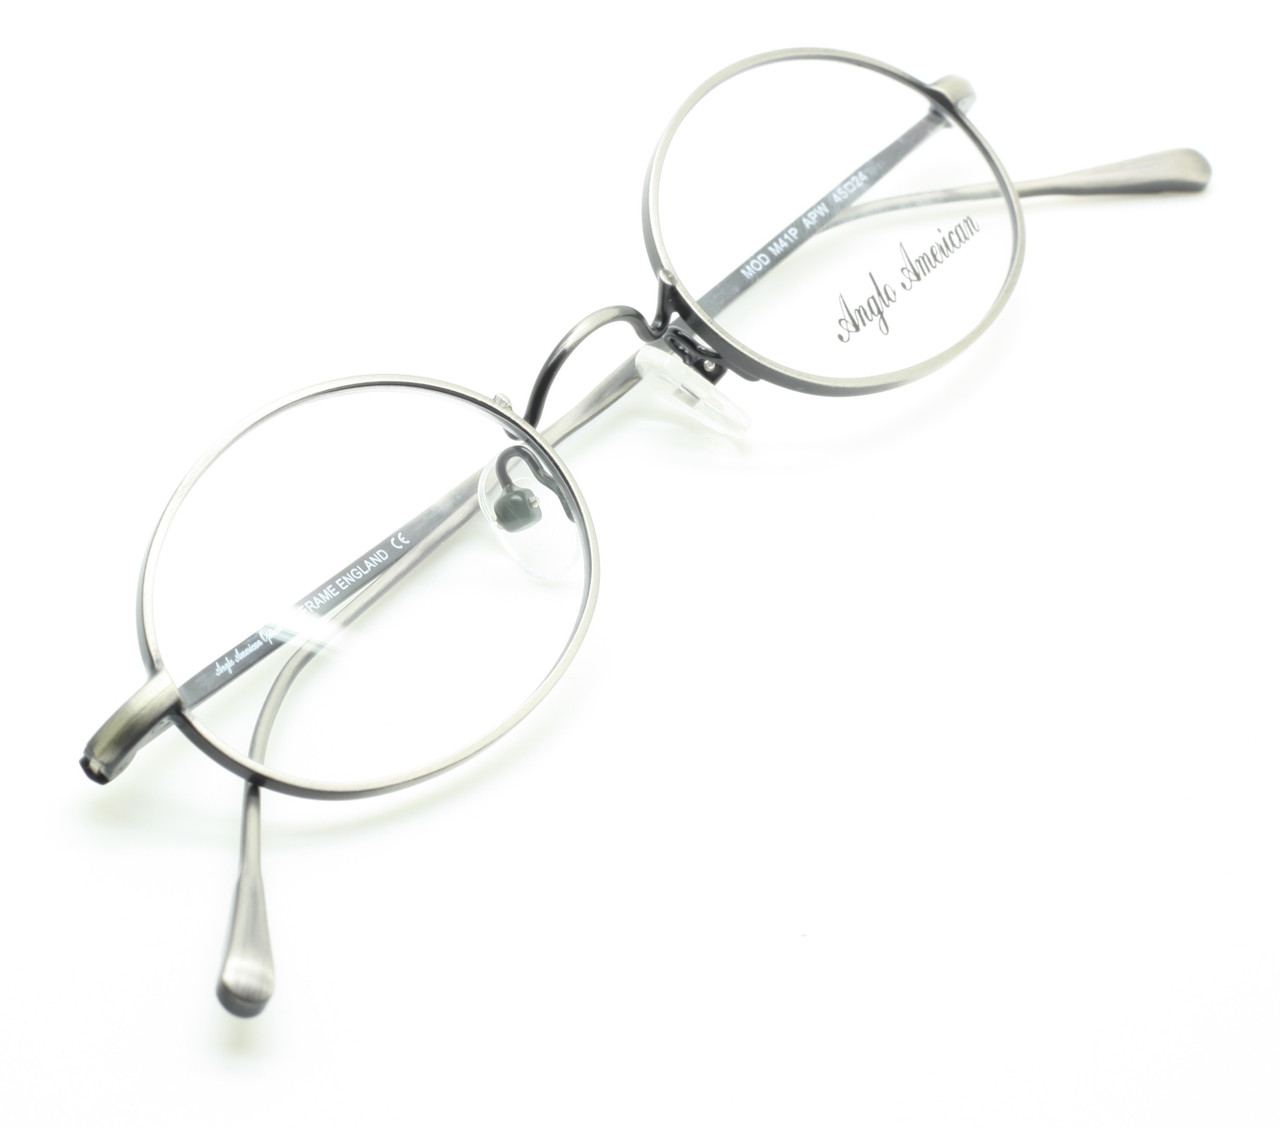 Anglo American 41P APW Spectacles Can Be Purchased From The Old Glasses Shop Ltd